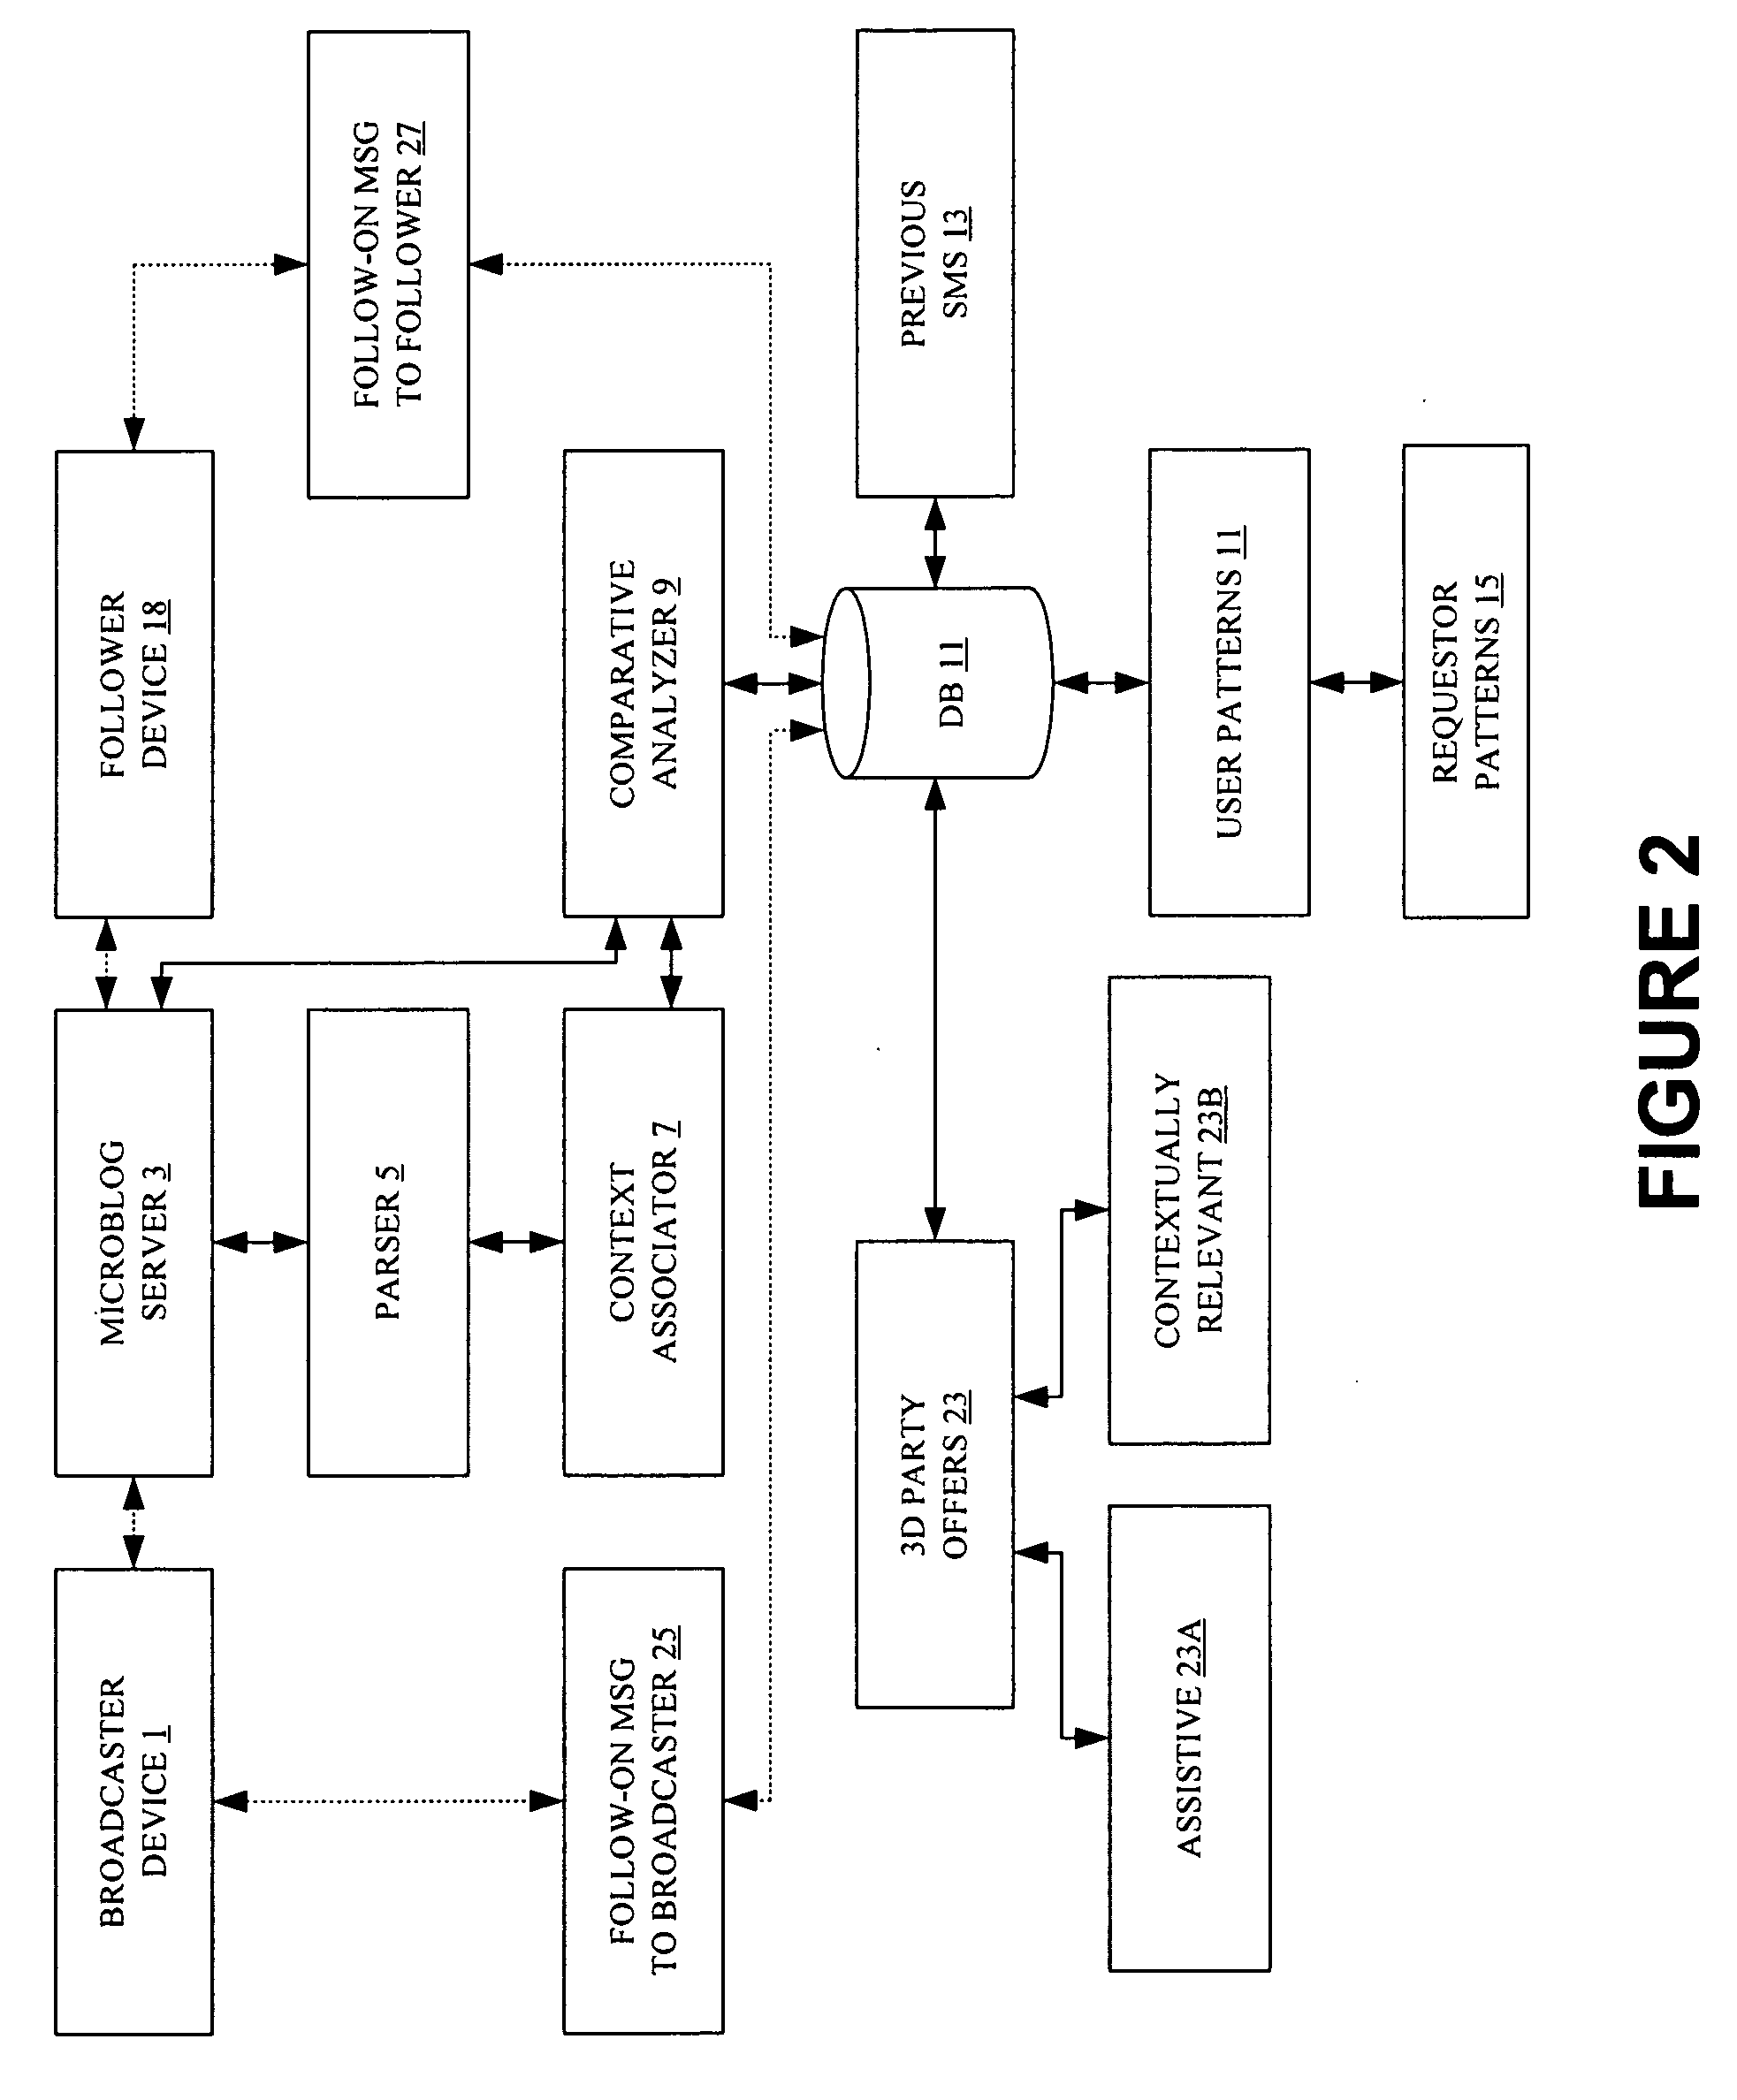 Microblog search engine system and method